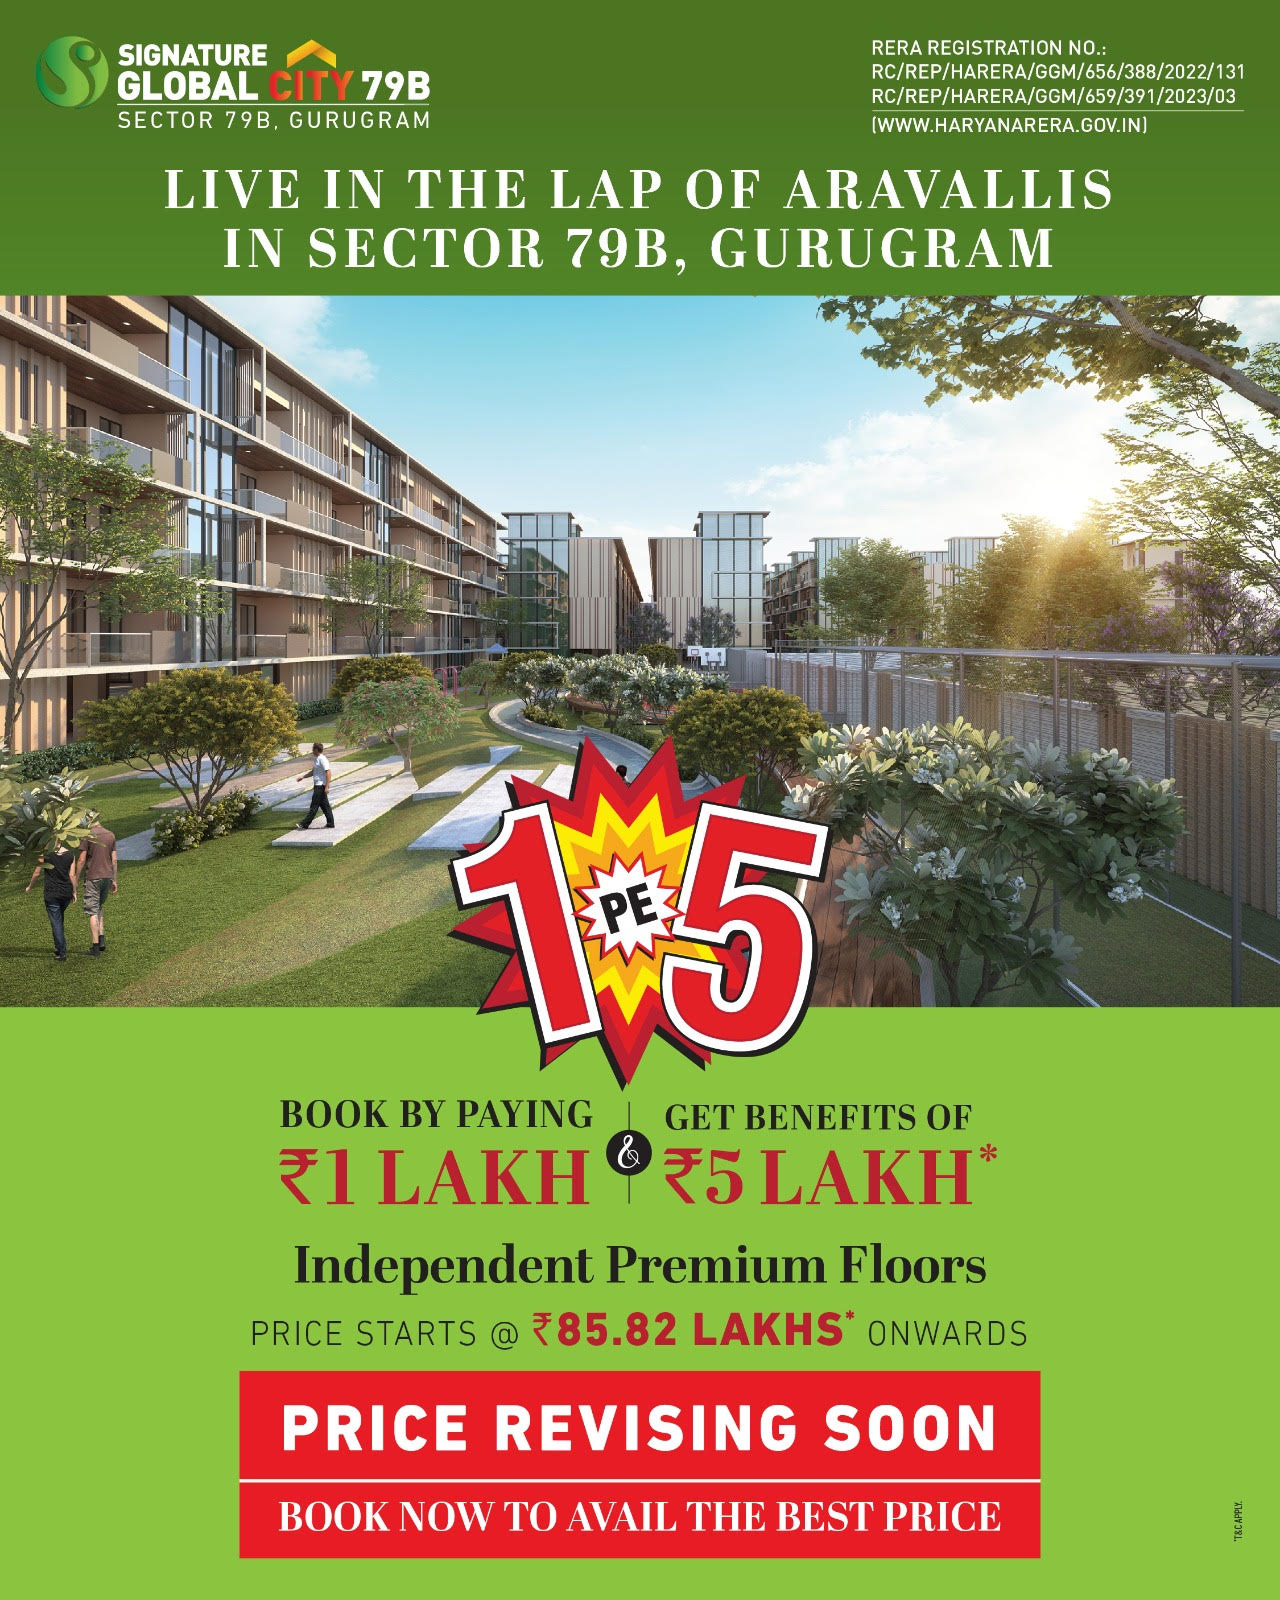 Hurry secure your dream home now before prices revise for Signature Global City 79B, Gurgaon Update